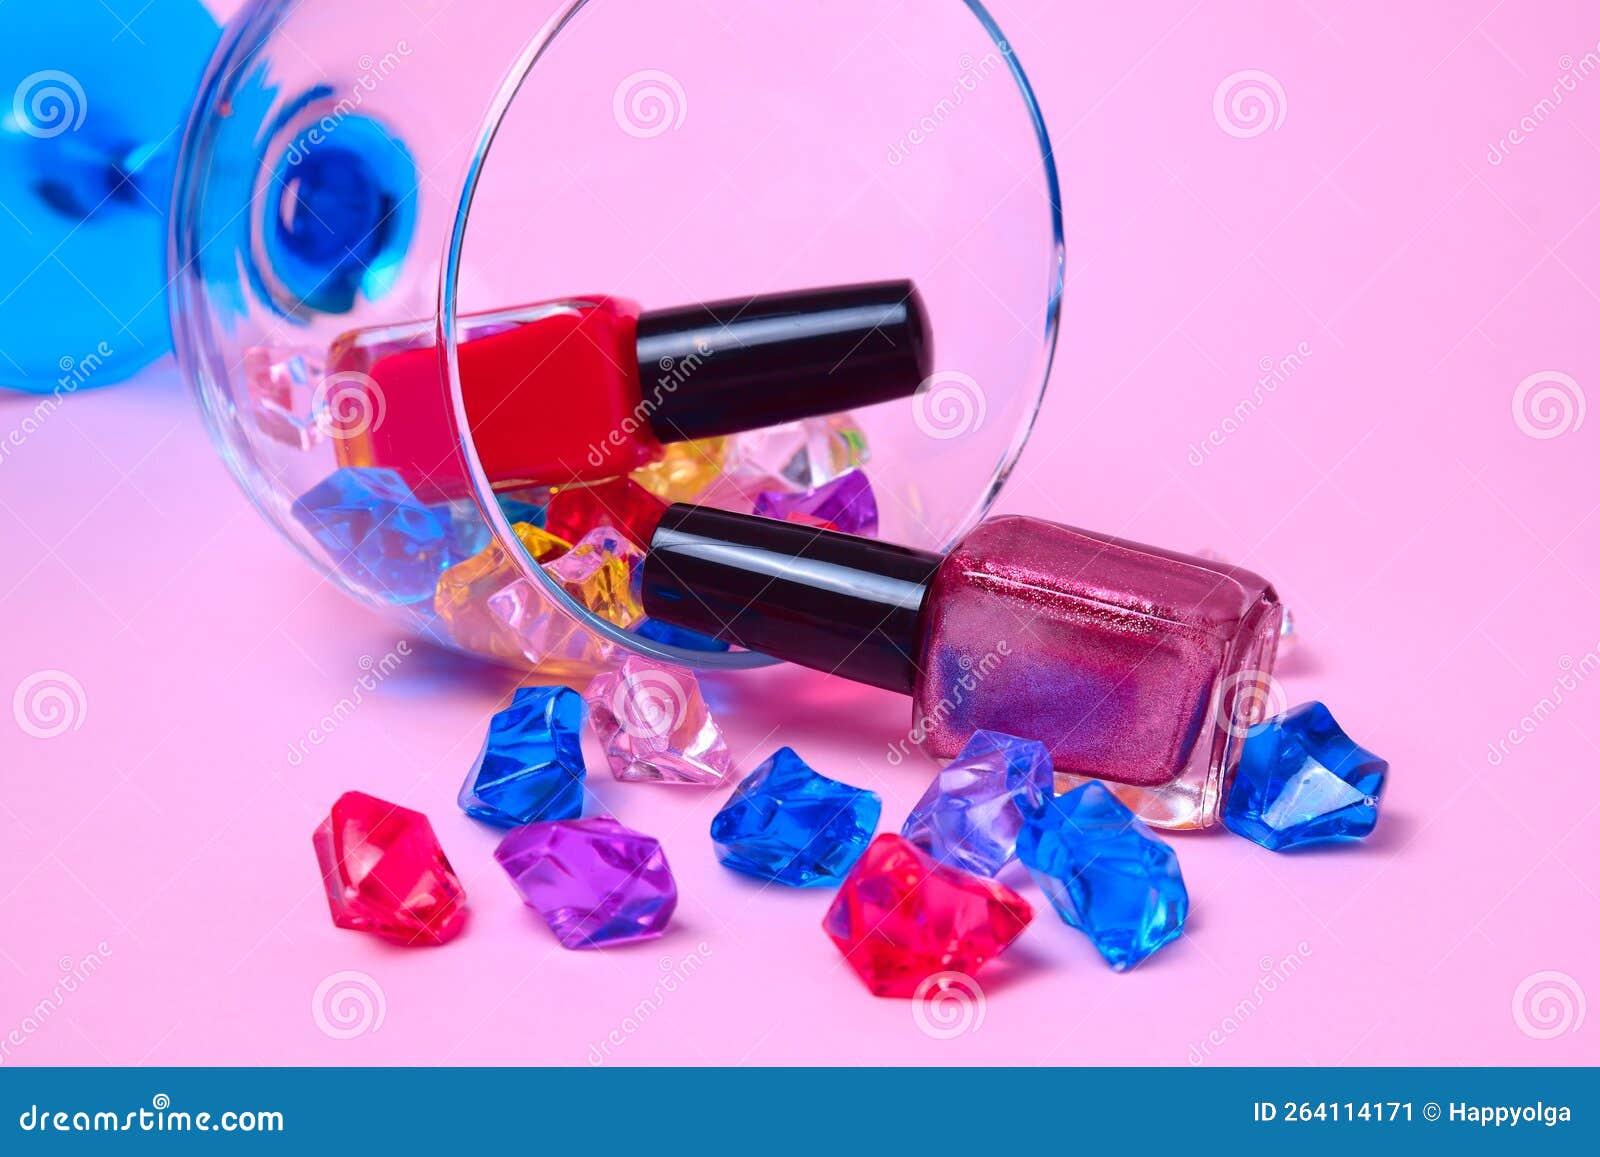 6. "Sparkly nail polish with gems" - wide 3